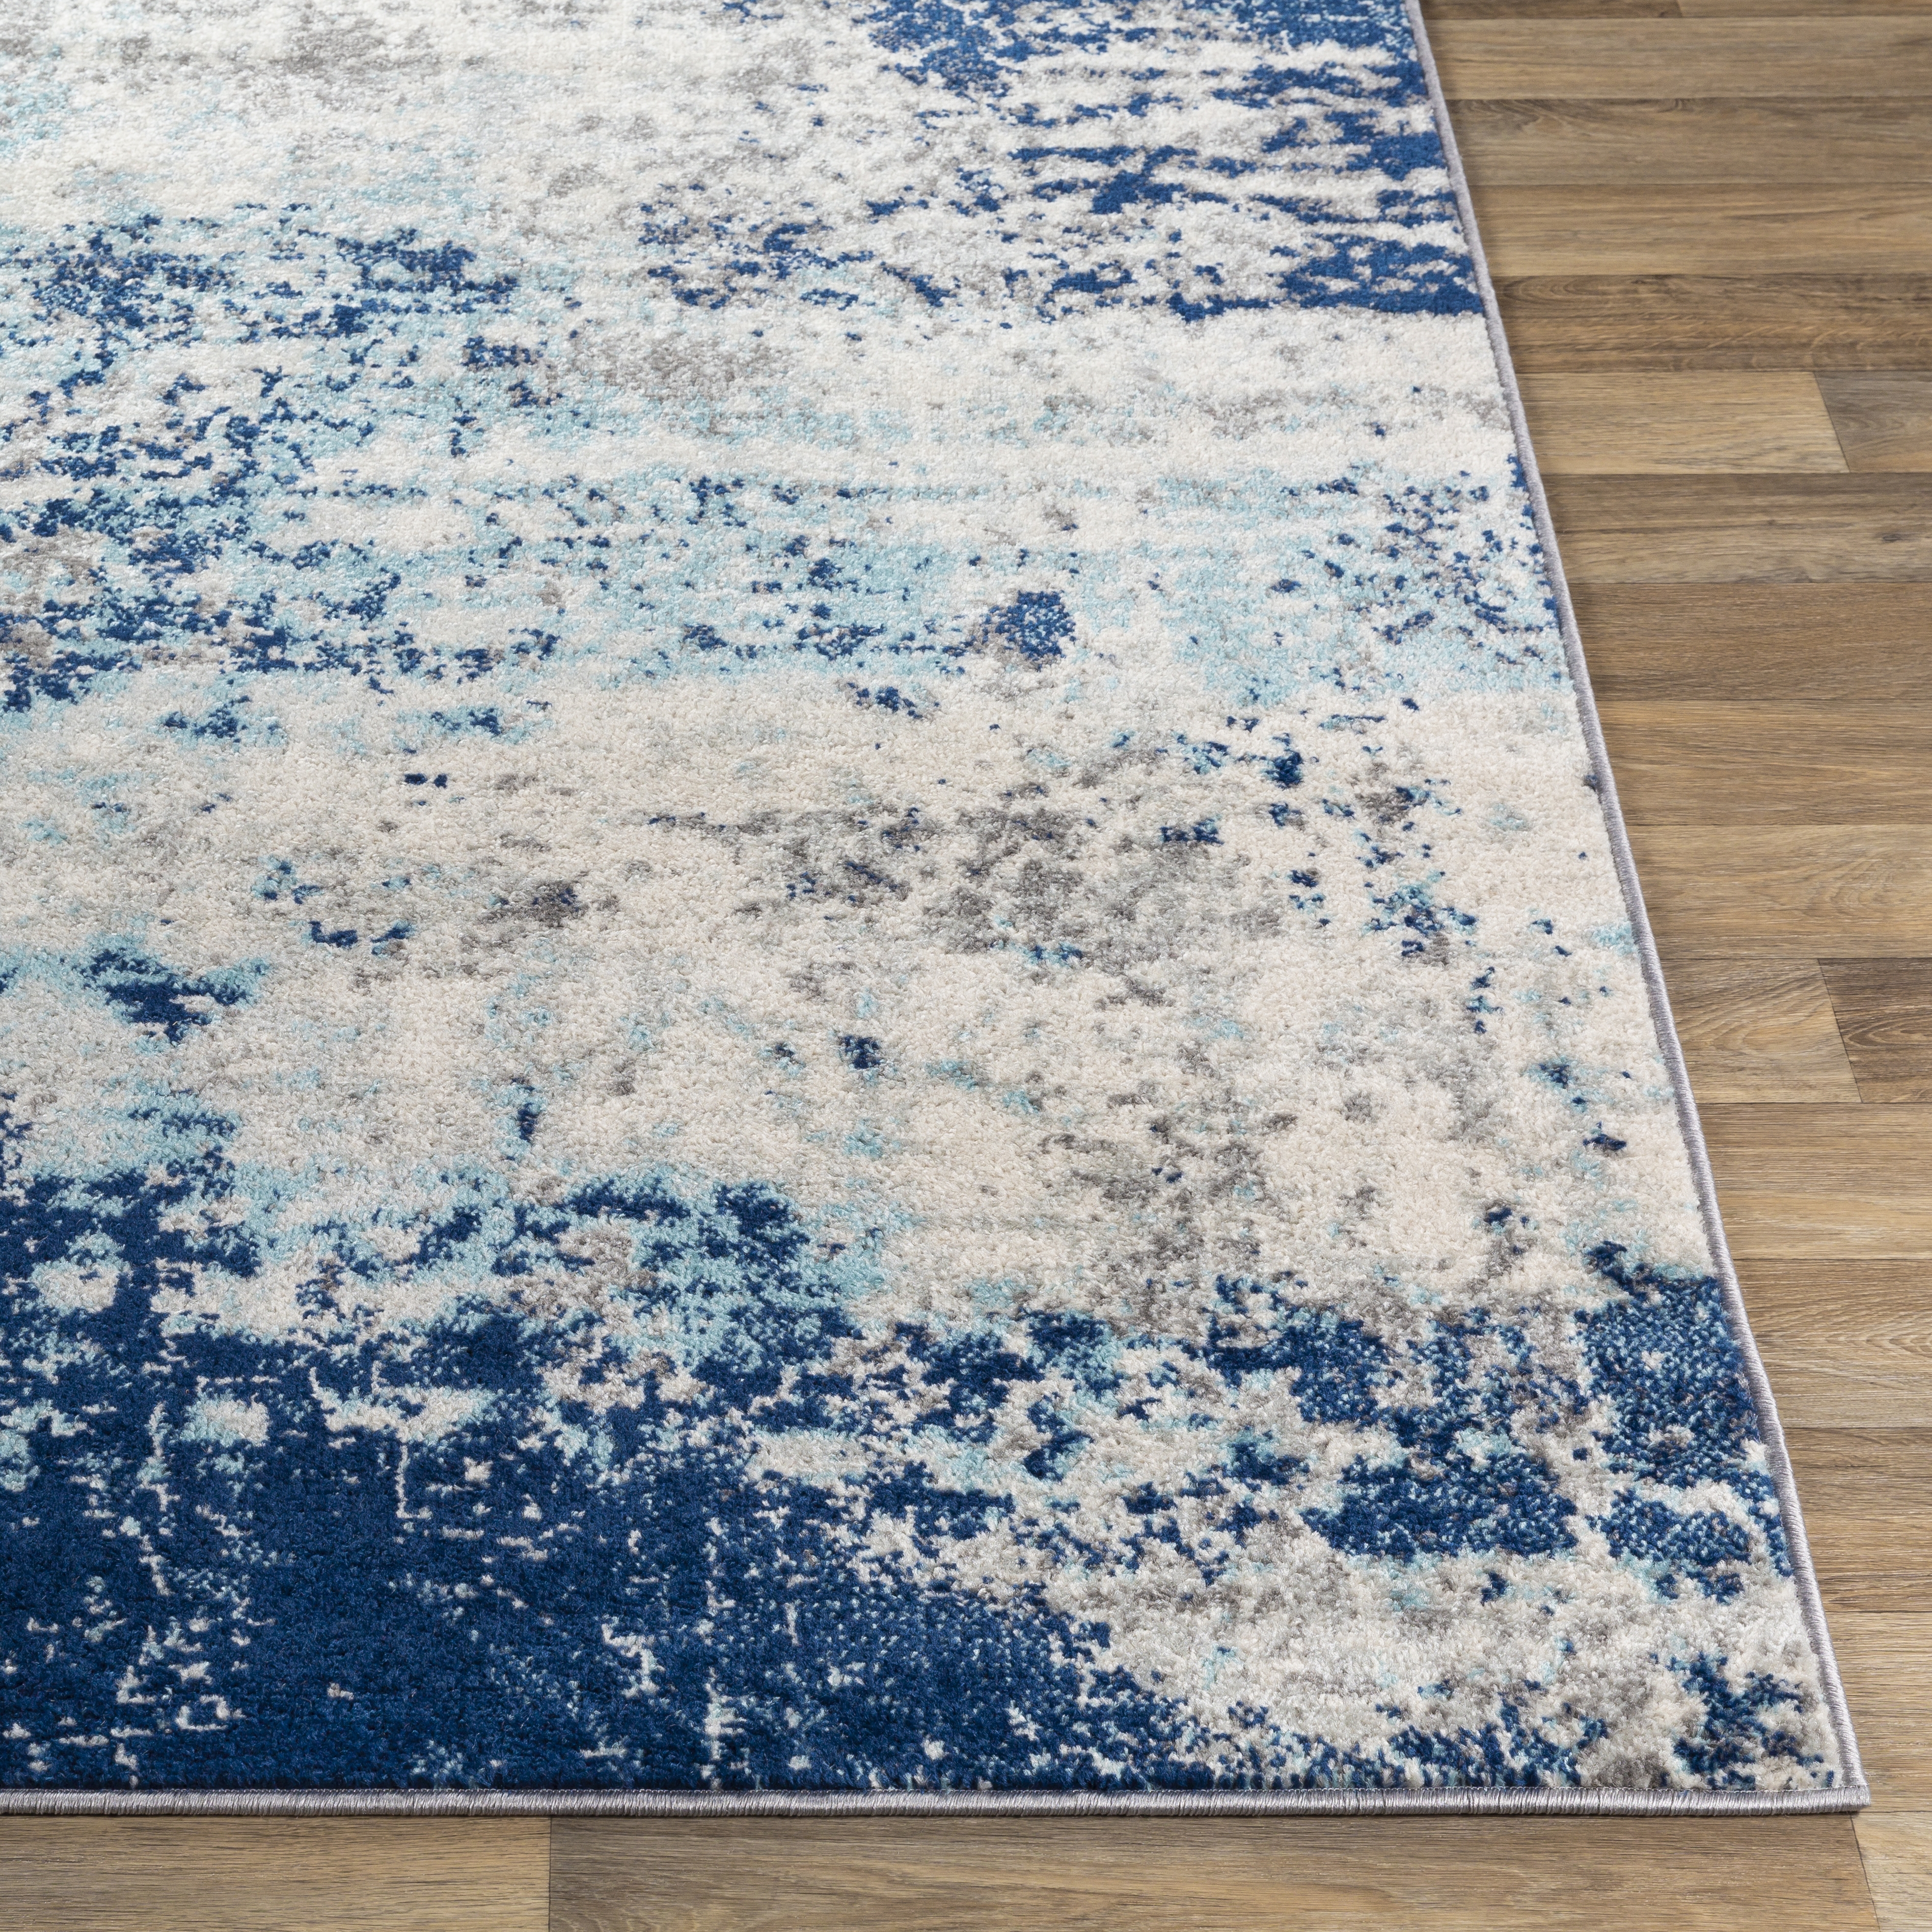 Chester Rug, 7'10" x 10'2" - Image 2